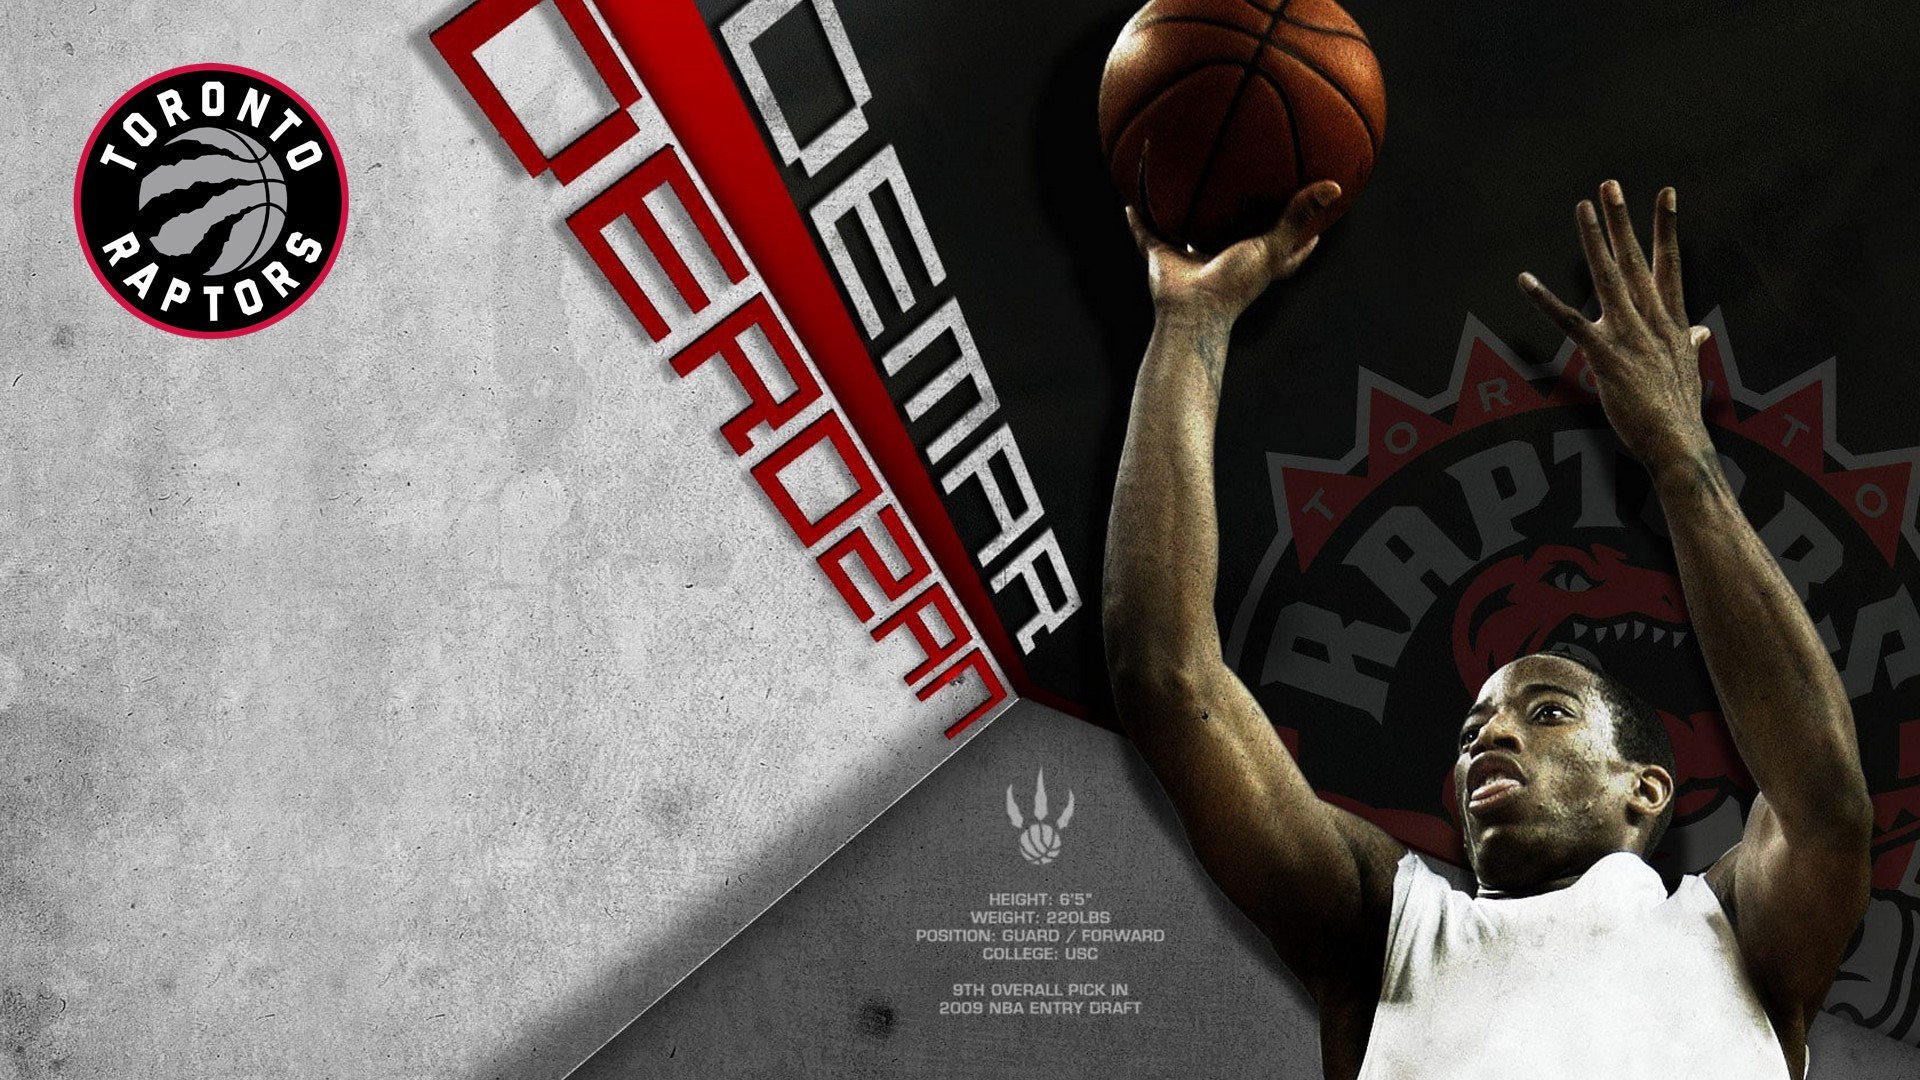 1920x1080 DeMar DeRozan Wallpaper with image dimensions  pixel. You can make  this wallpaper for your